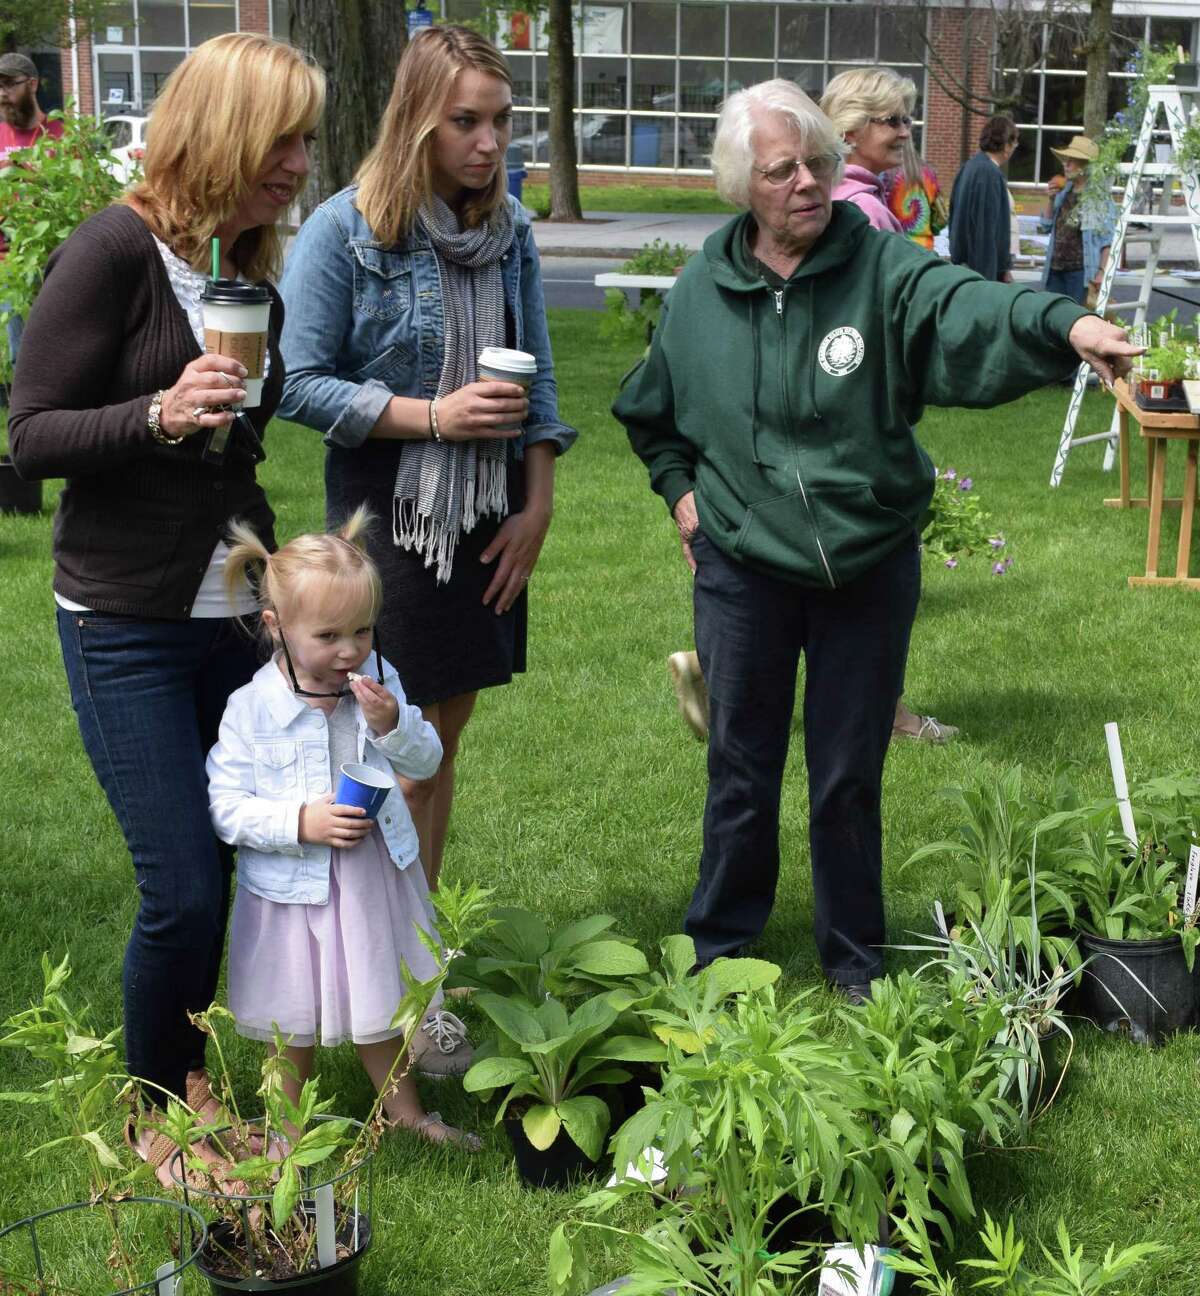 Spectrum/Cynthia Chilson of Brookfield, left, and Lauren Chilson of Warren talk with Ann Stone of the Garden Club of New Milford as Layla Pfeifer, 2, of New Milford, niece of the Chilsons, passes the time munching on popcorn.